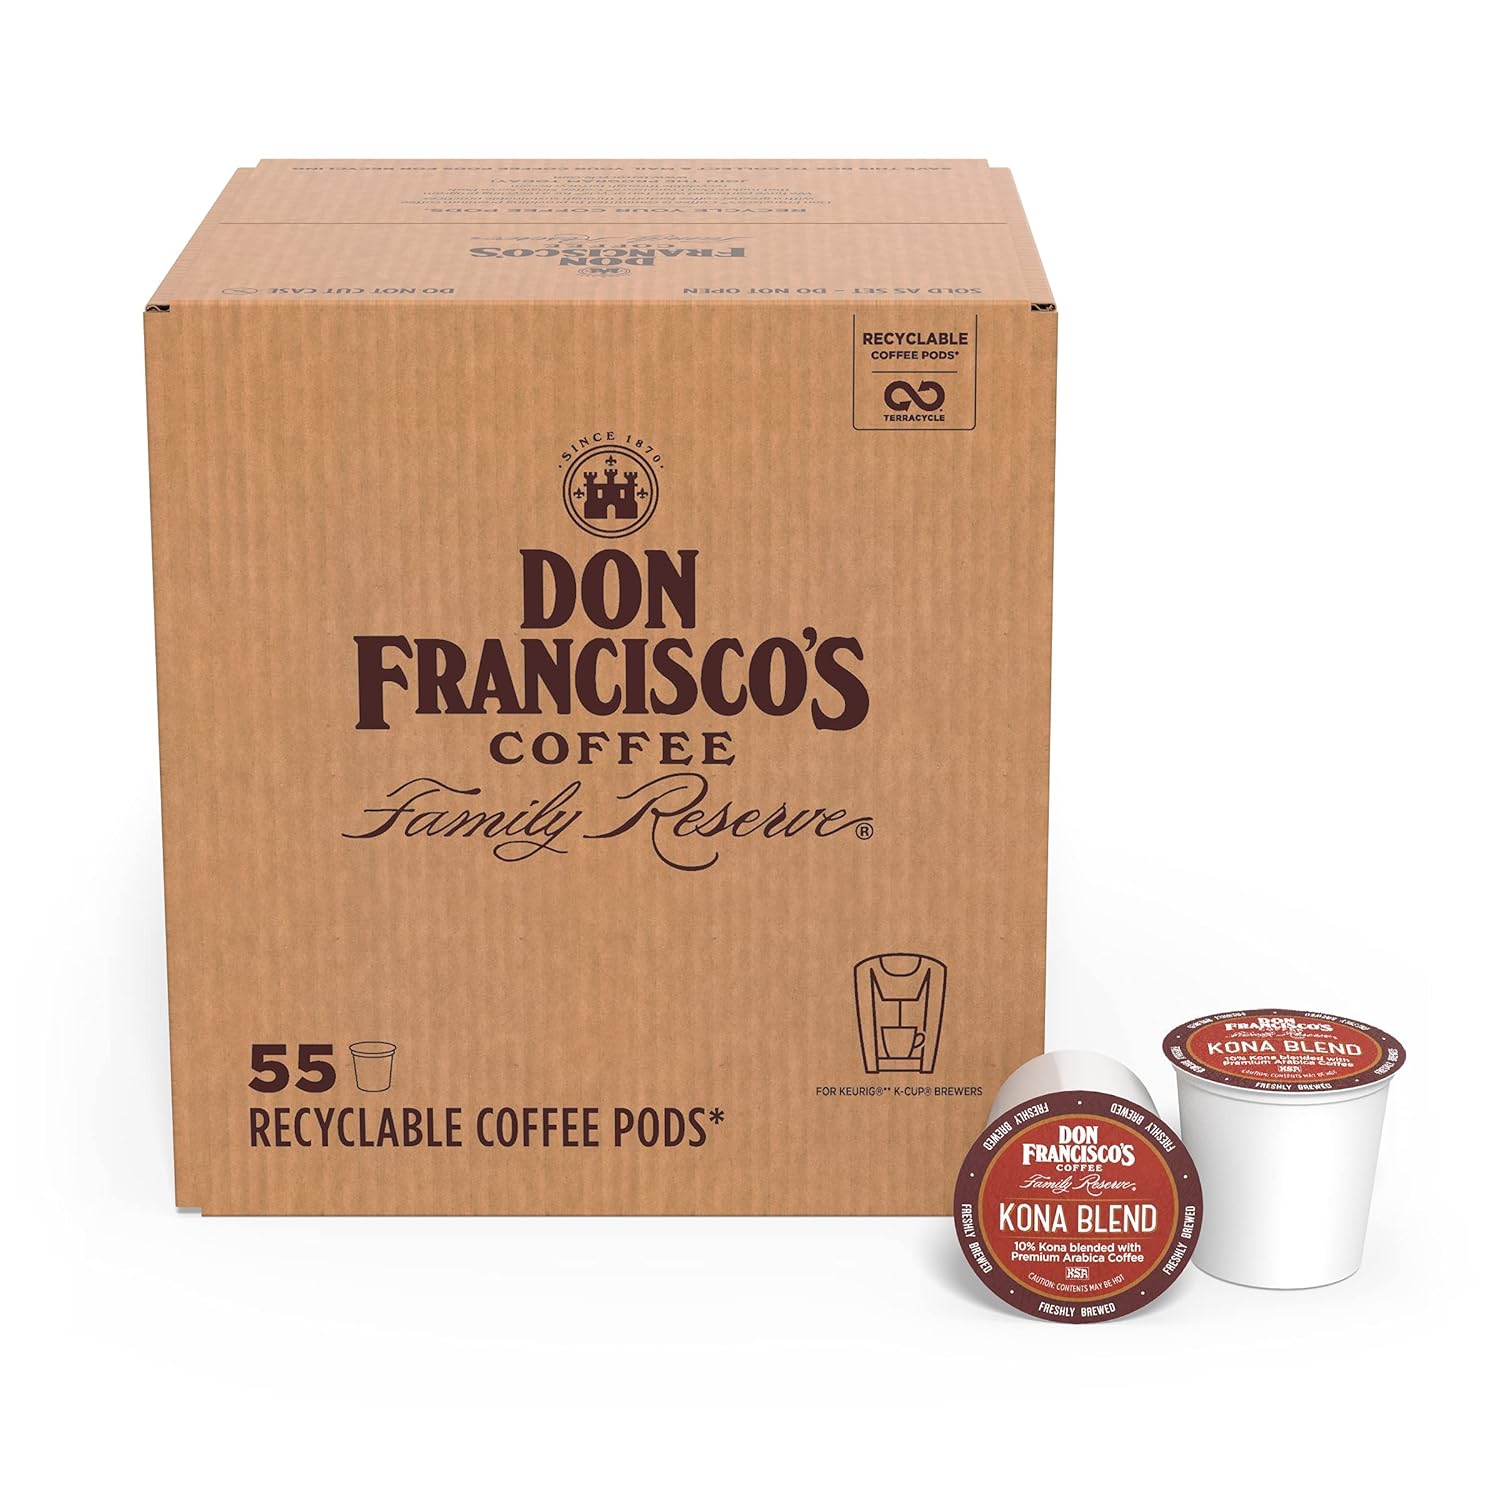 Don Franciscos Kona Blend Medium Roast Coffee Pods - 55 Count - Recyclable Single-Serve Coffee Pods, Compatible with your K- Cup Keurig Coffee Maker